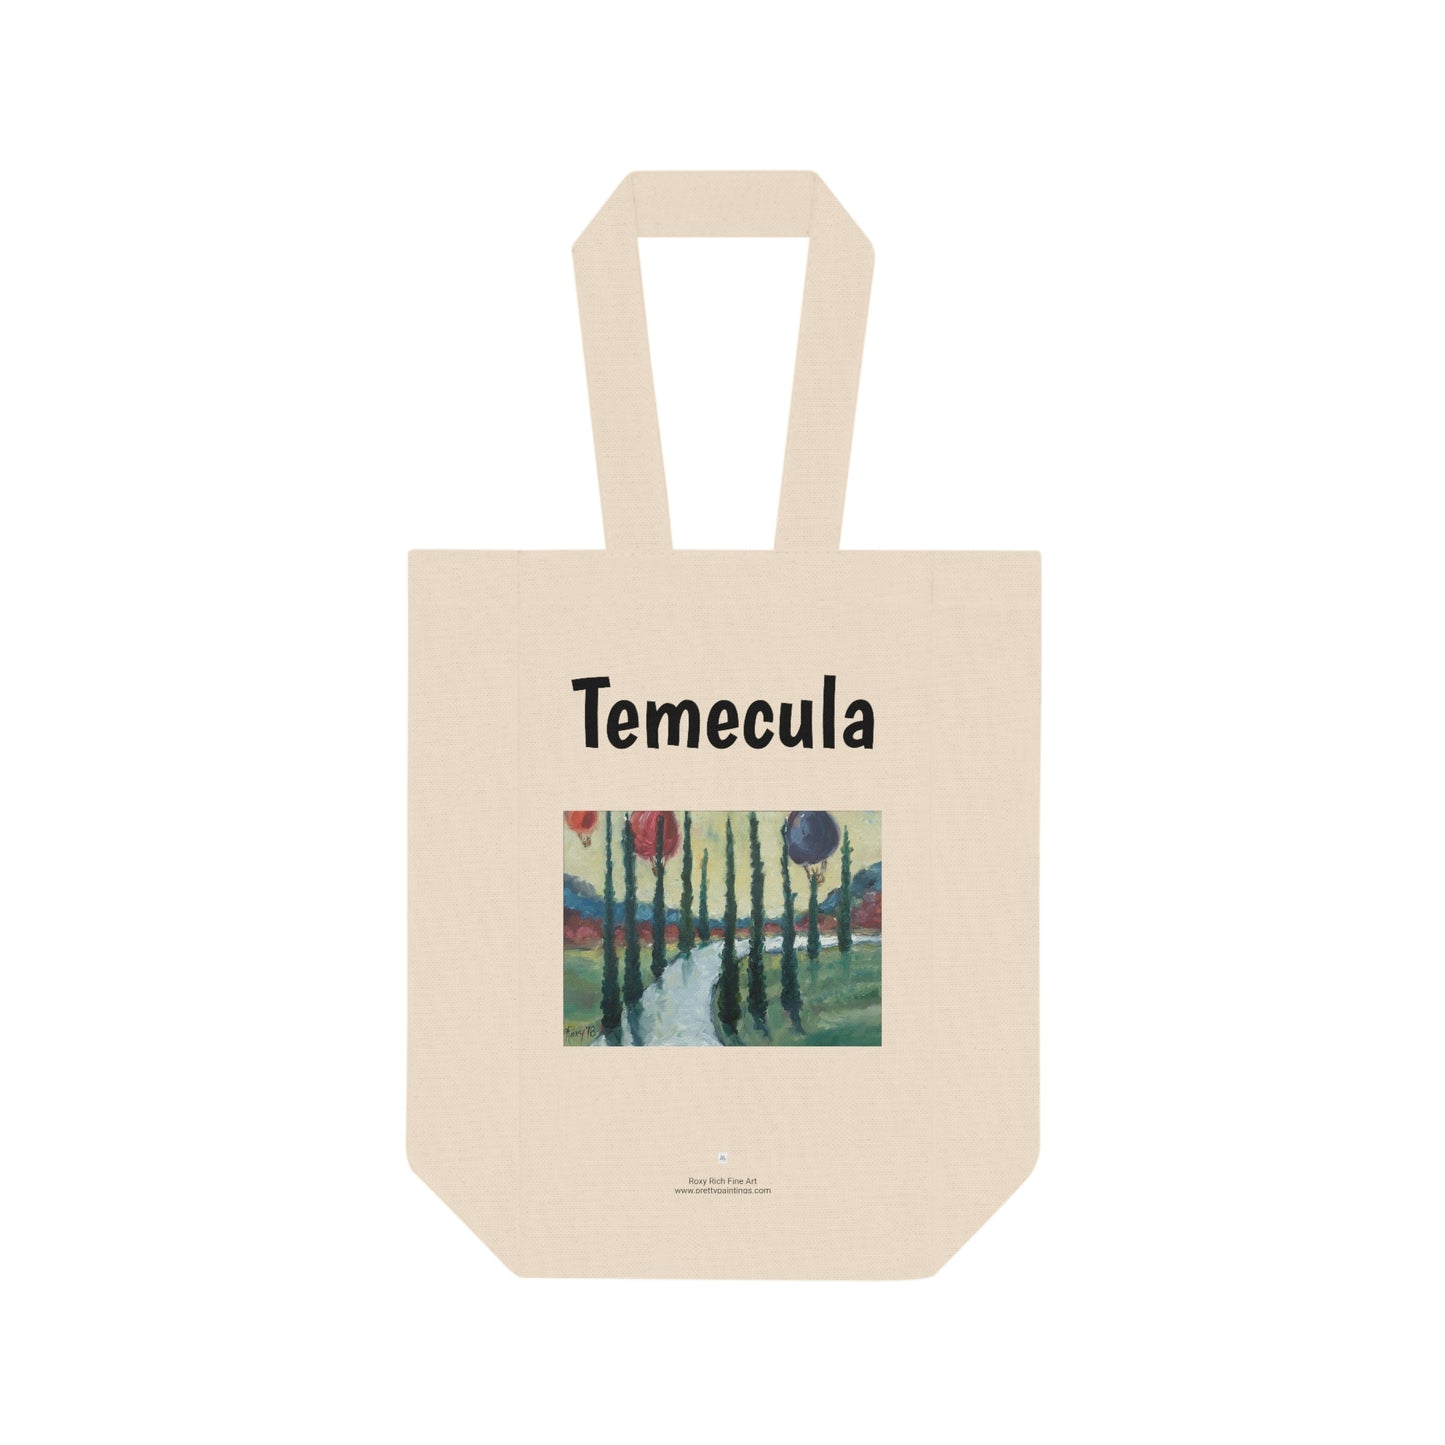 Temecula Double Wine Tote Bag featuring "Wine Country Balloons" painting